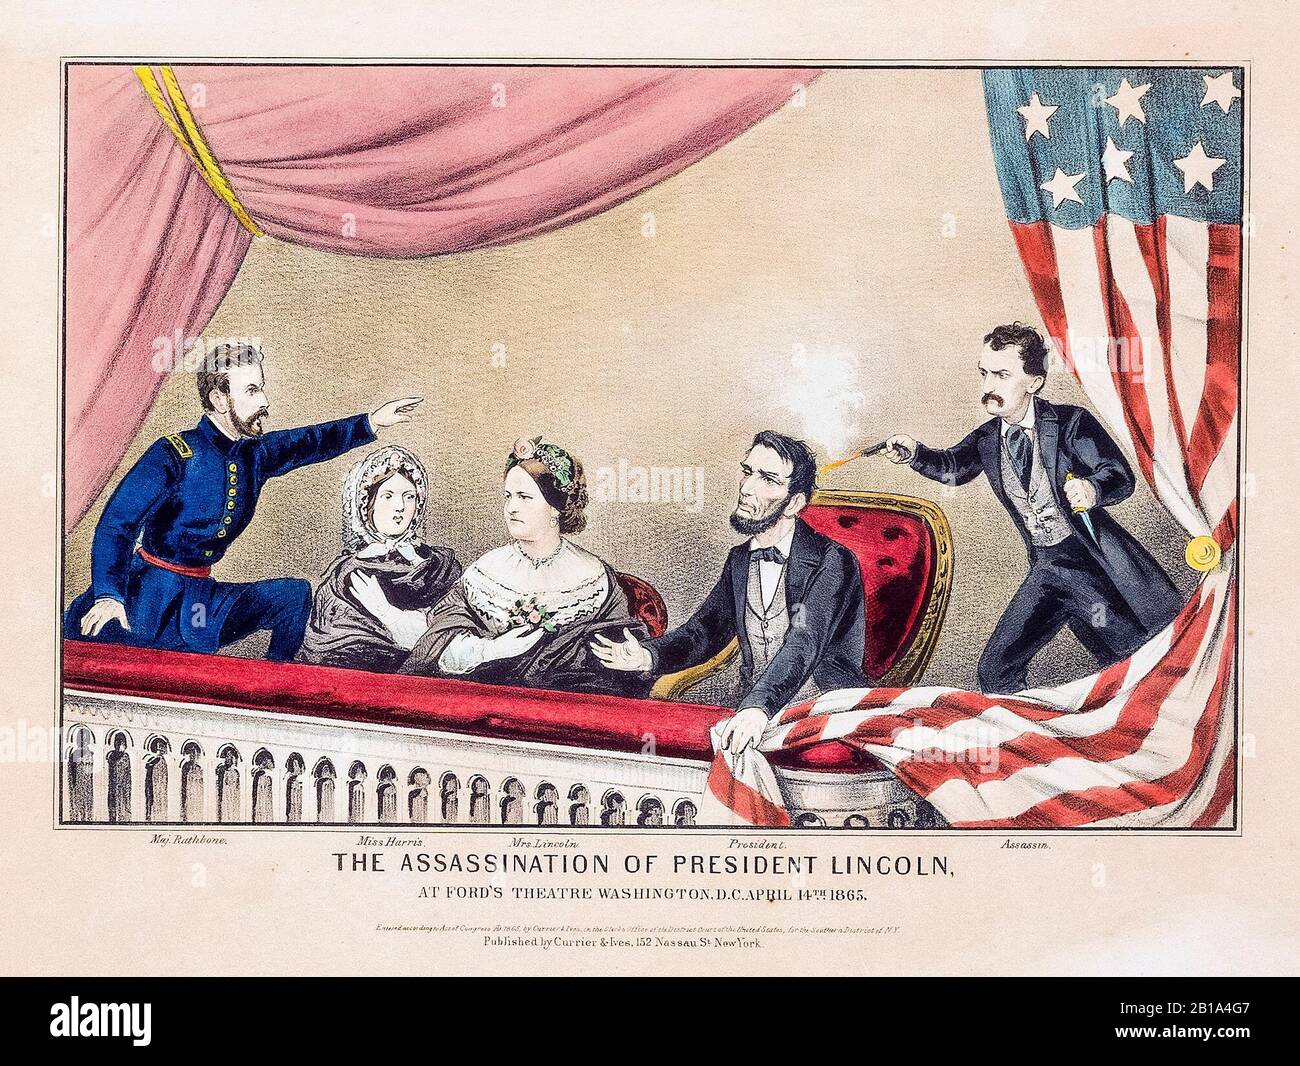 The Assassination of President Lincoln April 14 1865 NEW Vintage POSTER 